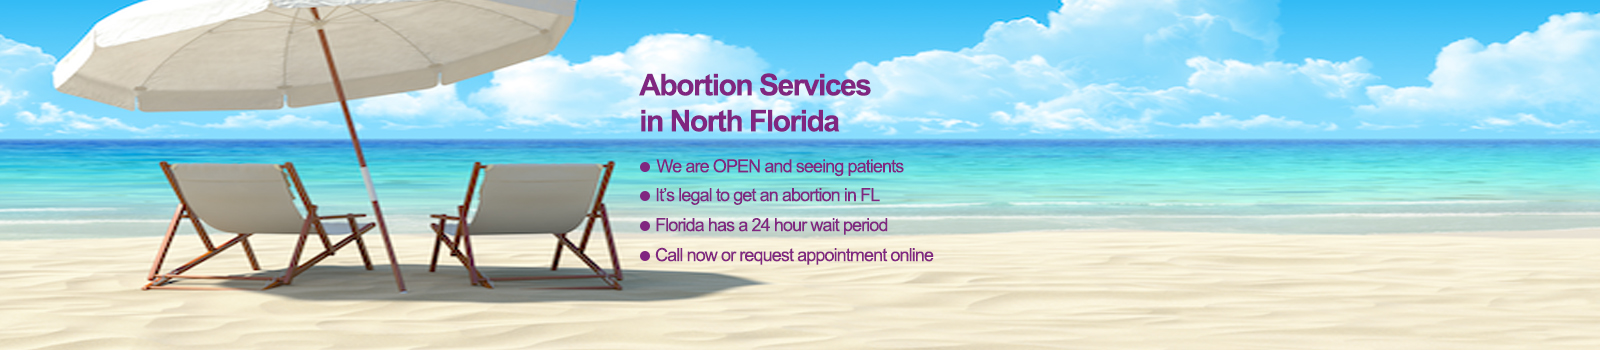 Legal abortion care in Florida - North Florida Women's Services abortion clinic